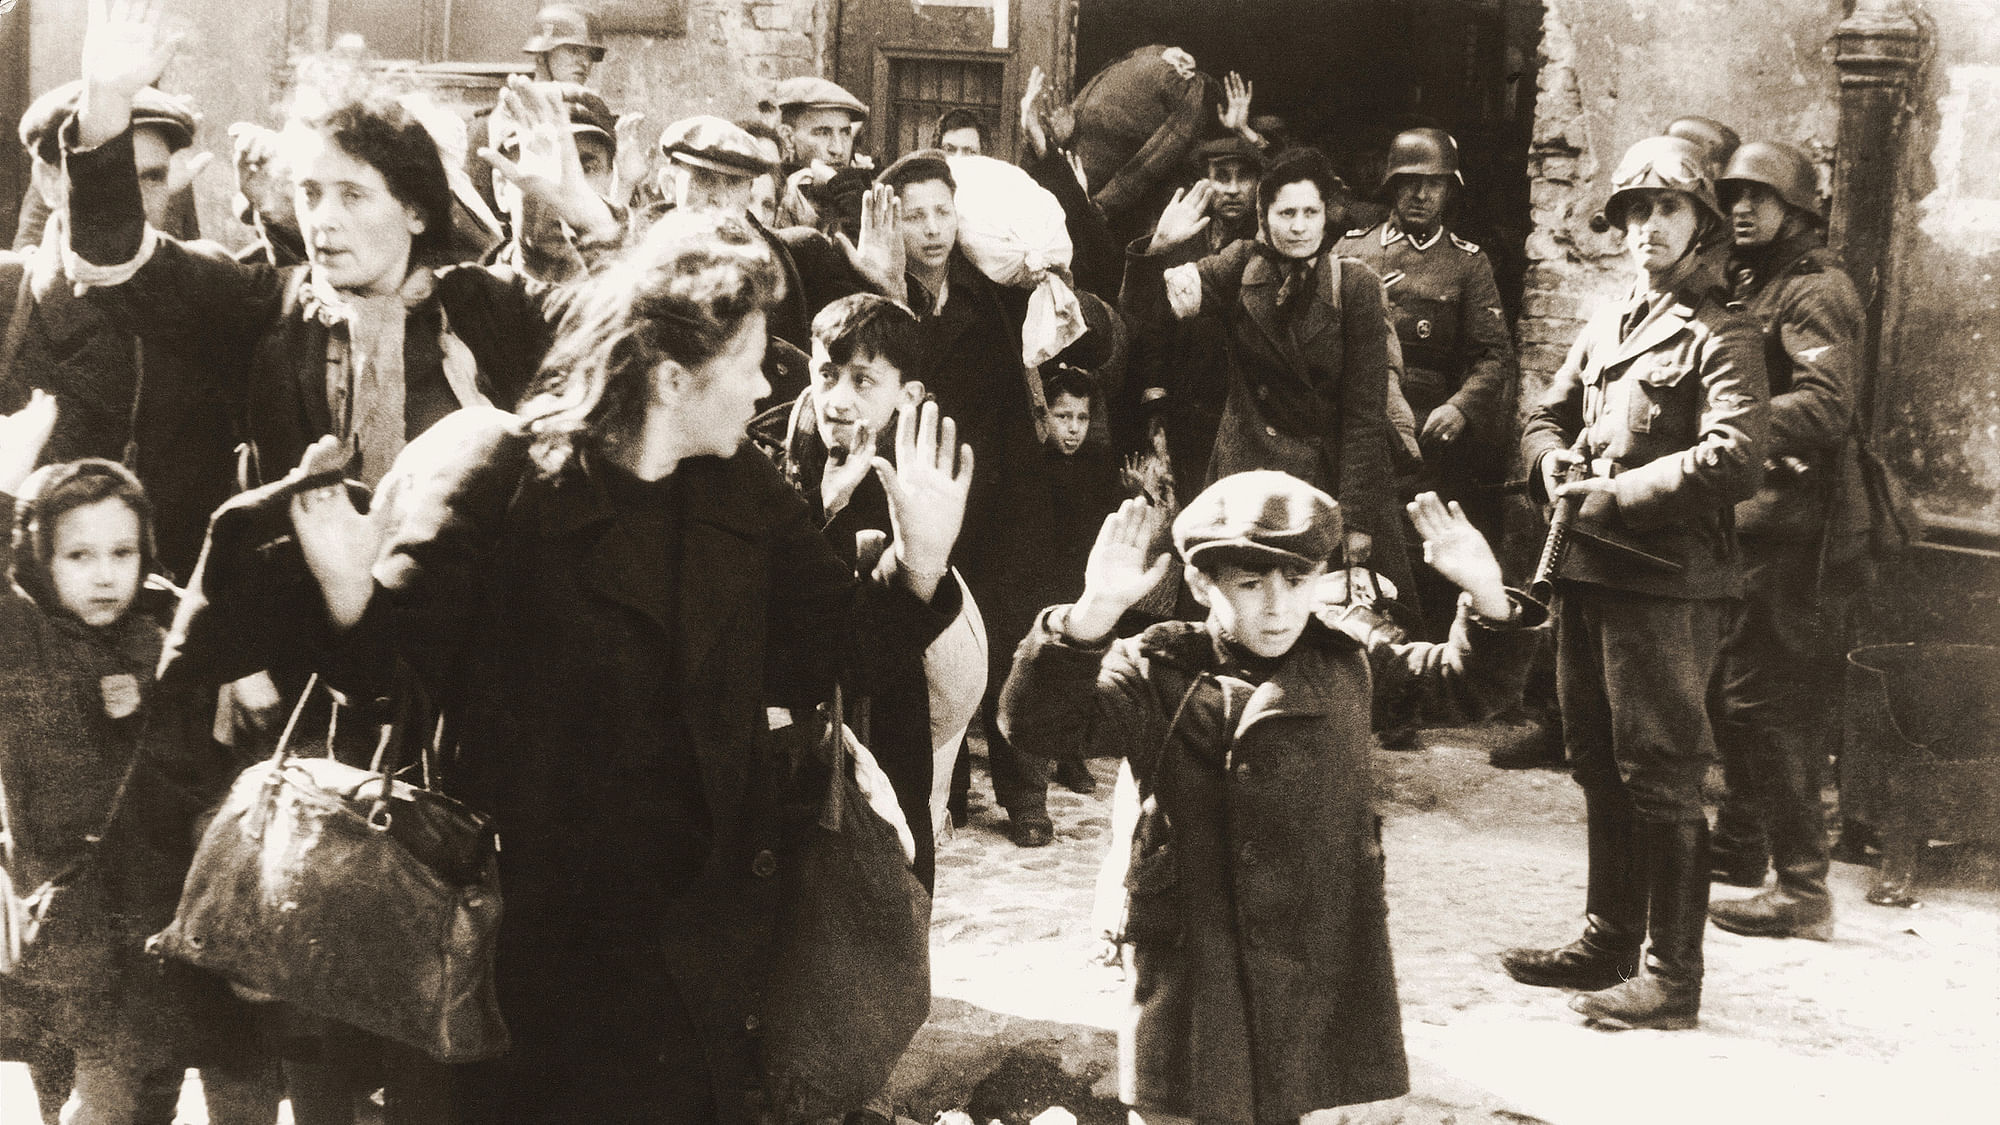 Warsaw Ghetto, 1943 (Photo: <a href="https://commons.wikimedia.org/wiki/File:Stroop_Report_-_Warsaw_Ghetto_Uprising_06.jpg">Wikimedia Commons</a>)